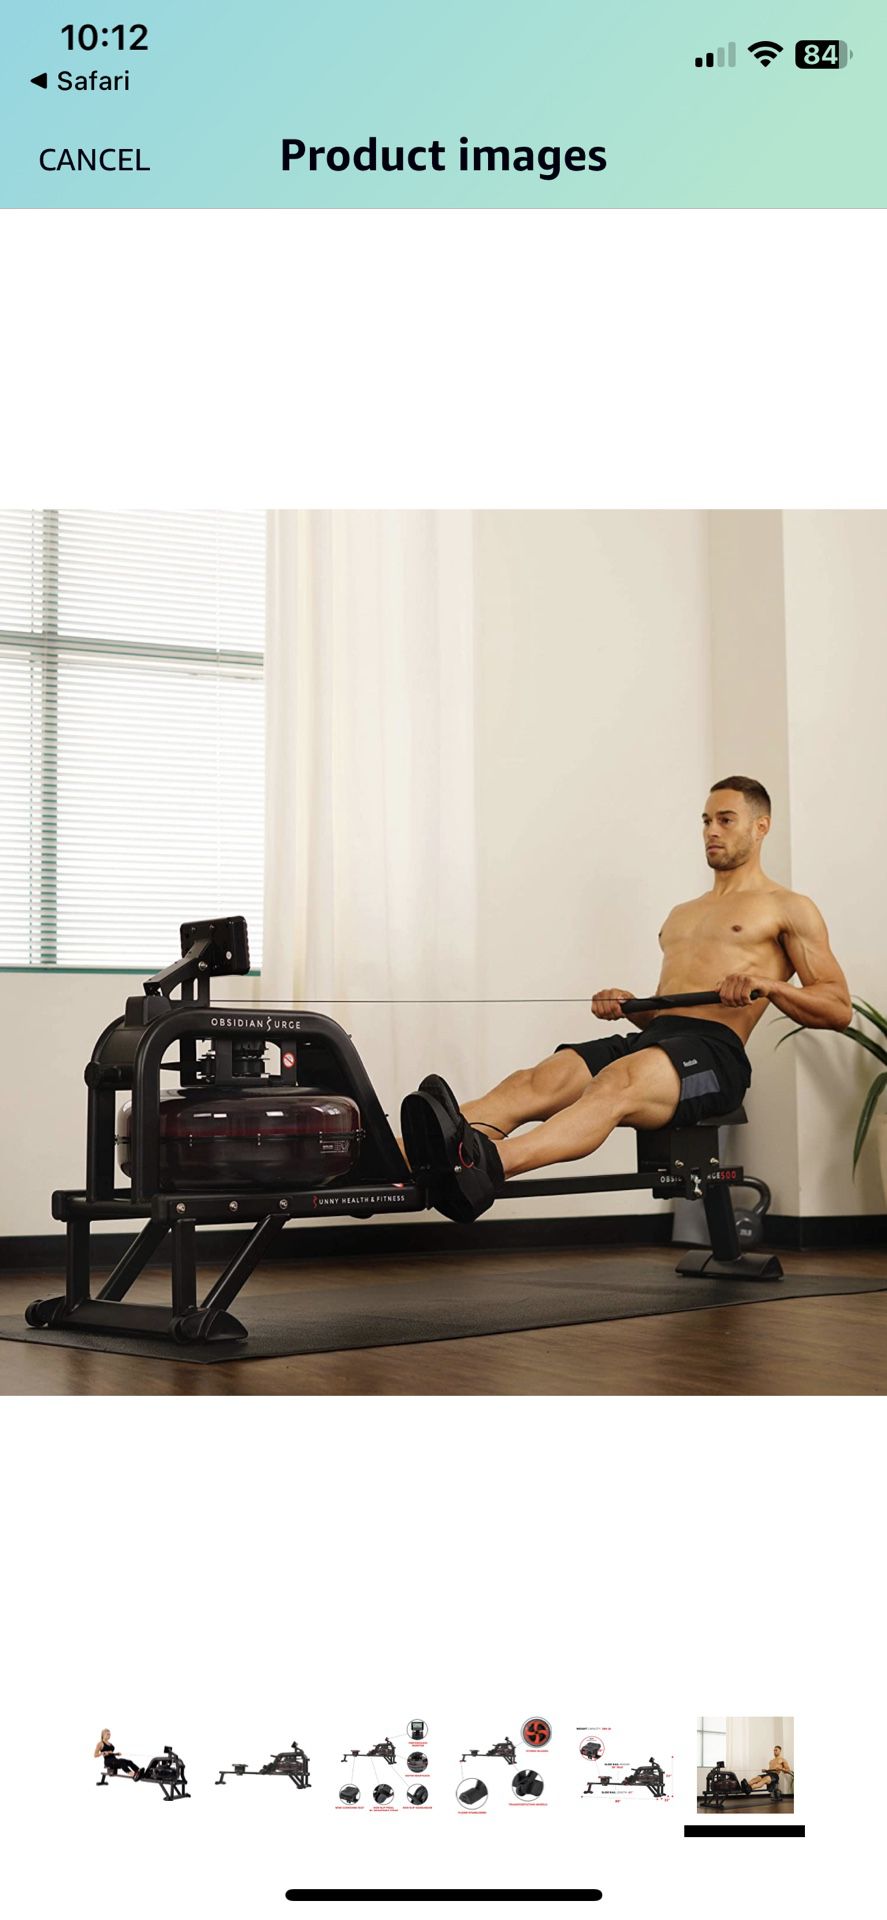 Obsidian Surge 500 Water Rowing Machine